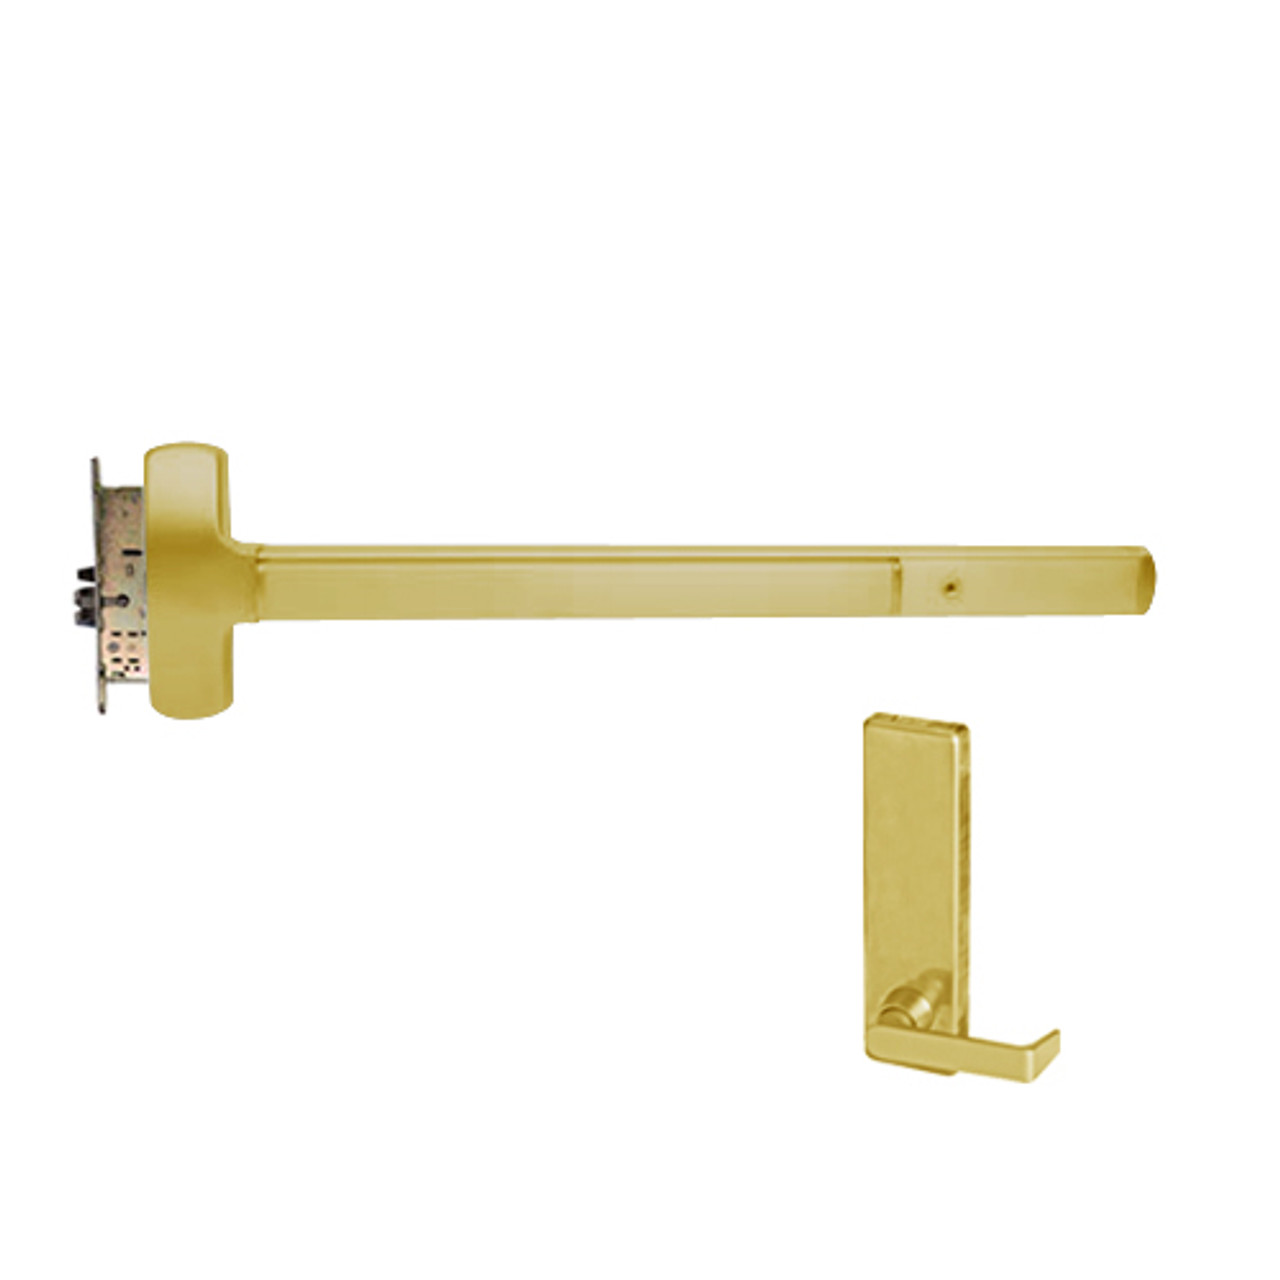 25-M-L-DT-DANE-US3-3-LHR Falcon Exit Device in Polished Brass